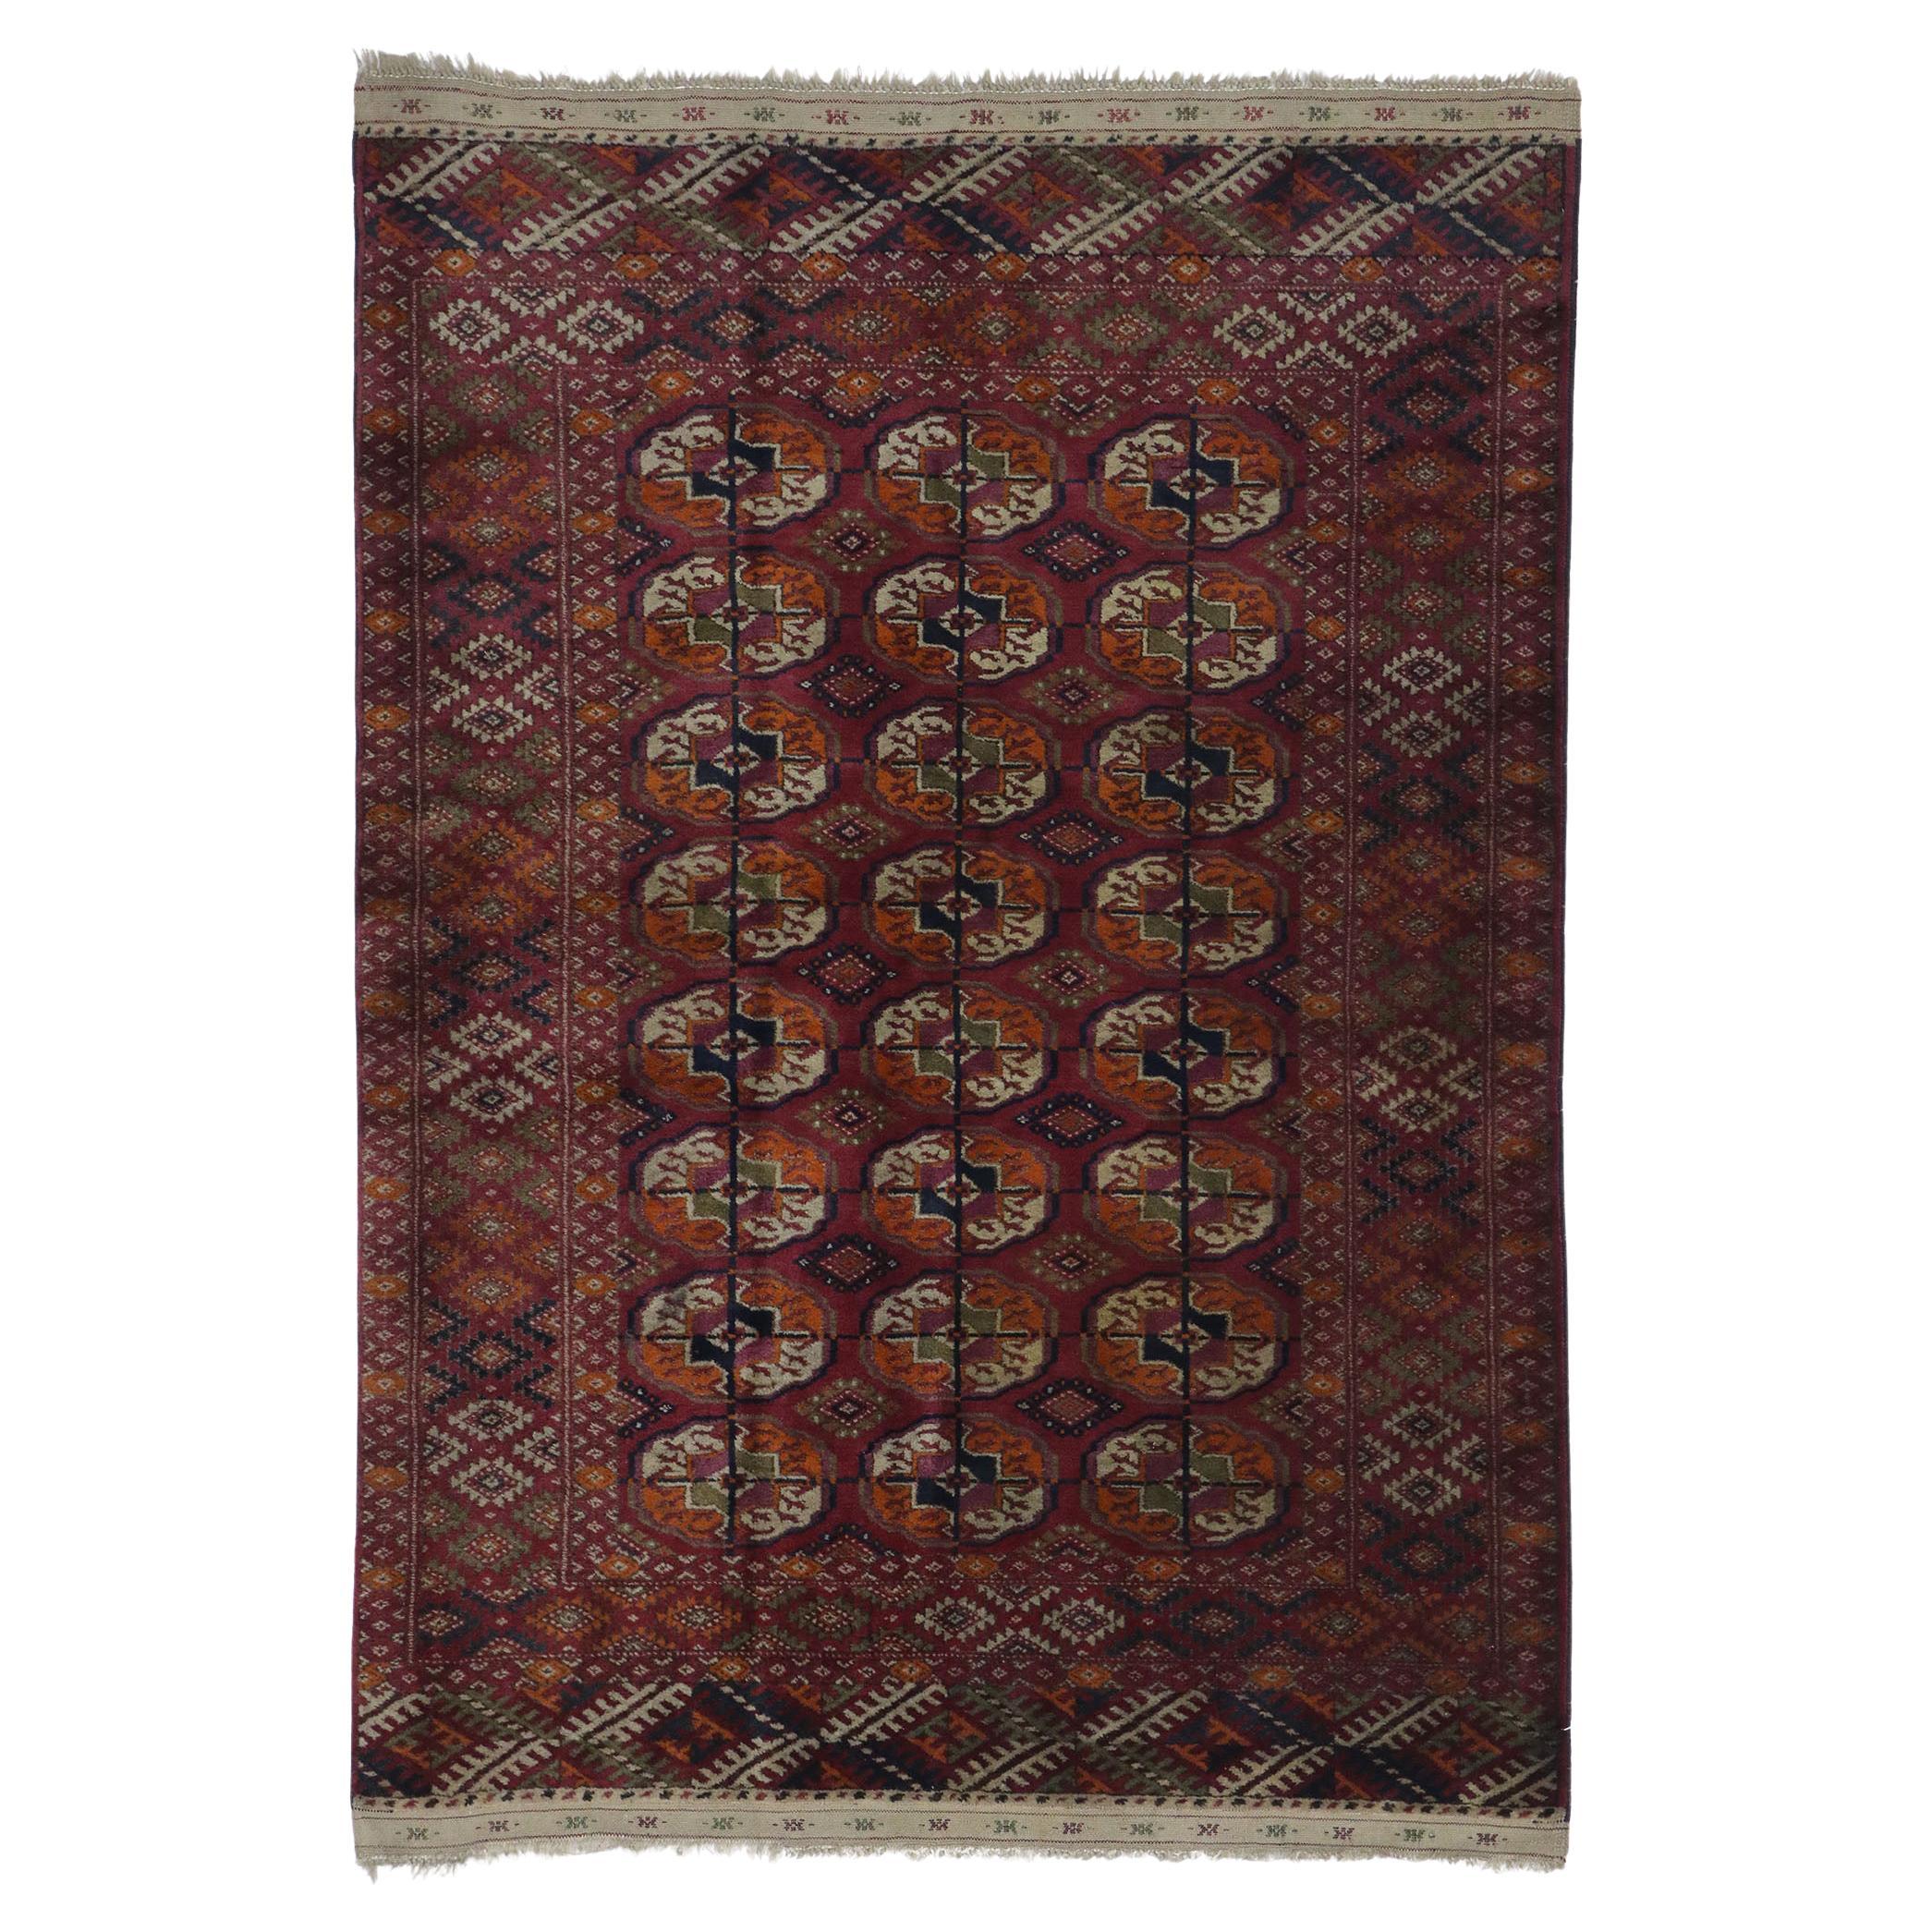 Antique Persian Baluchi Bokhara Rug with Mid-Century Modern Style For Sale